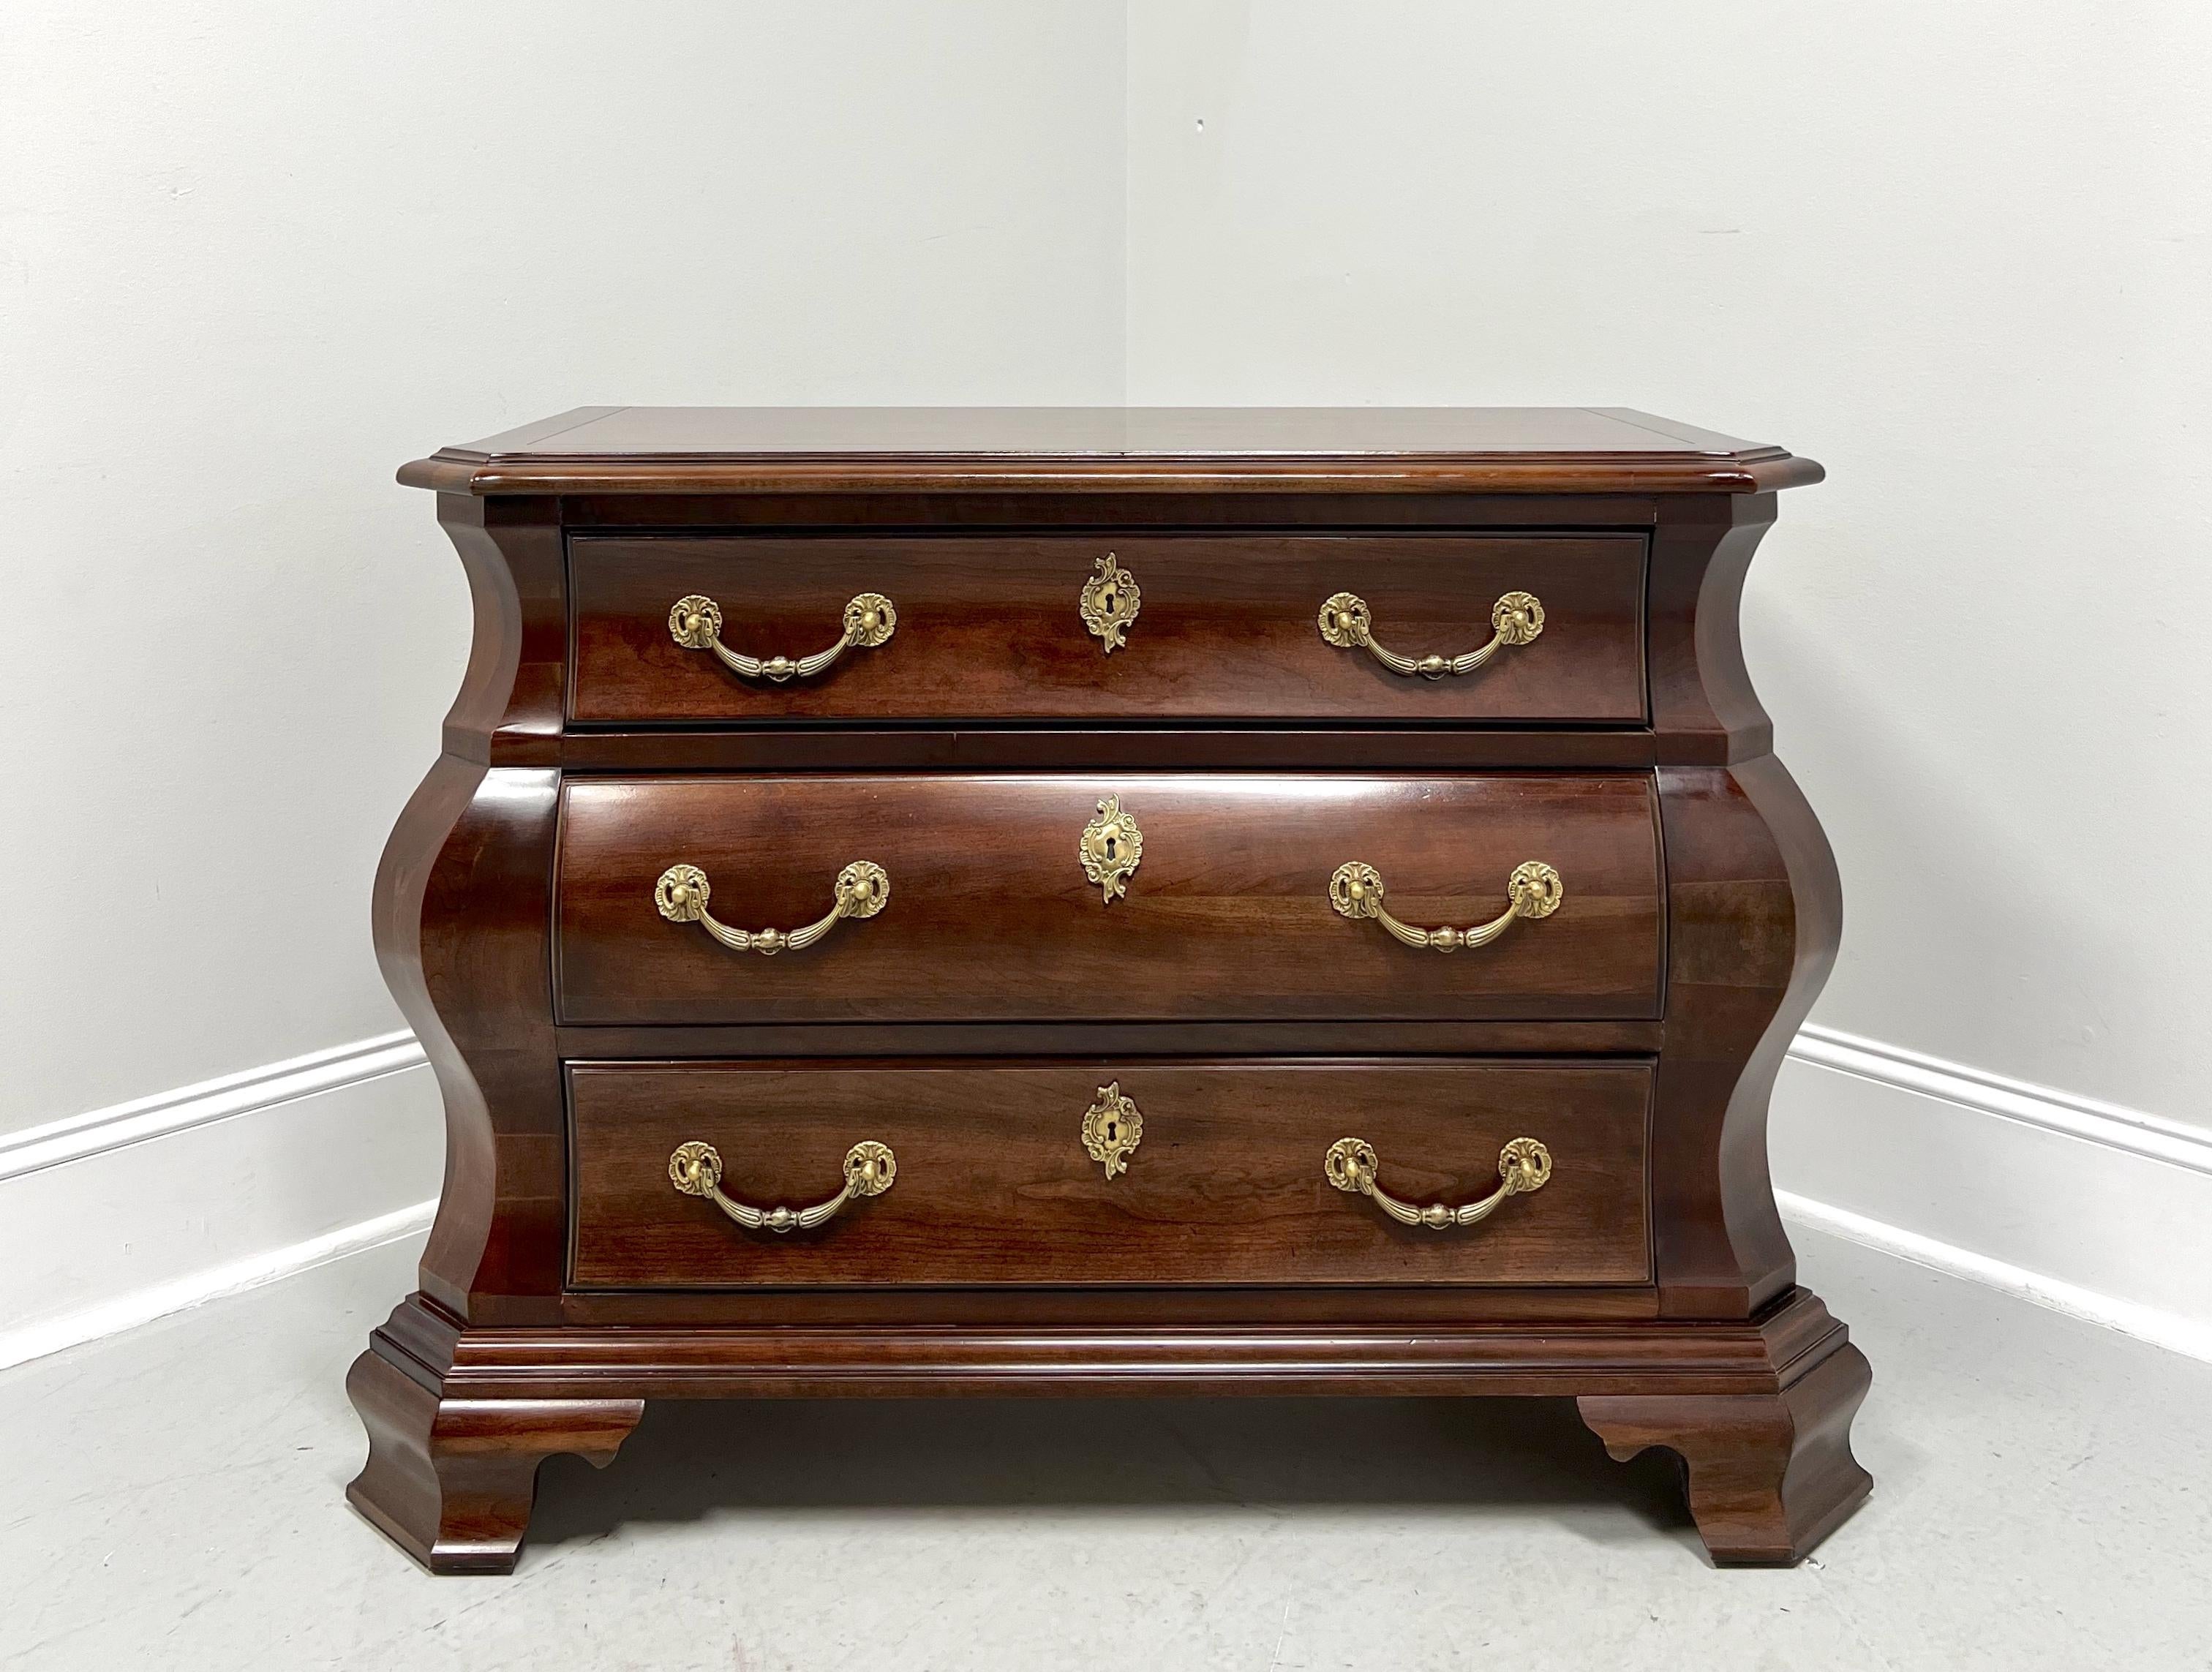 An Italian Provincial style bachelor chest by Century Furniture, from their Cardella Collection. Cherry wood with decorative brass hardware, bombe shaped, banded top with bevel edge & clipped corners, and ogee bracket feet. Features three drawers of